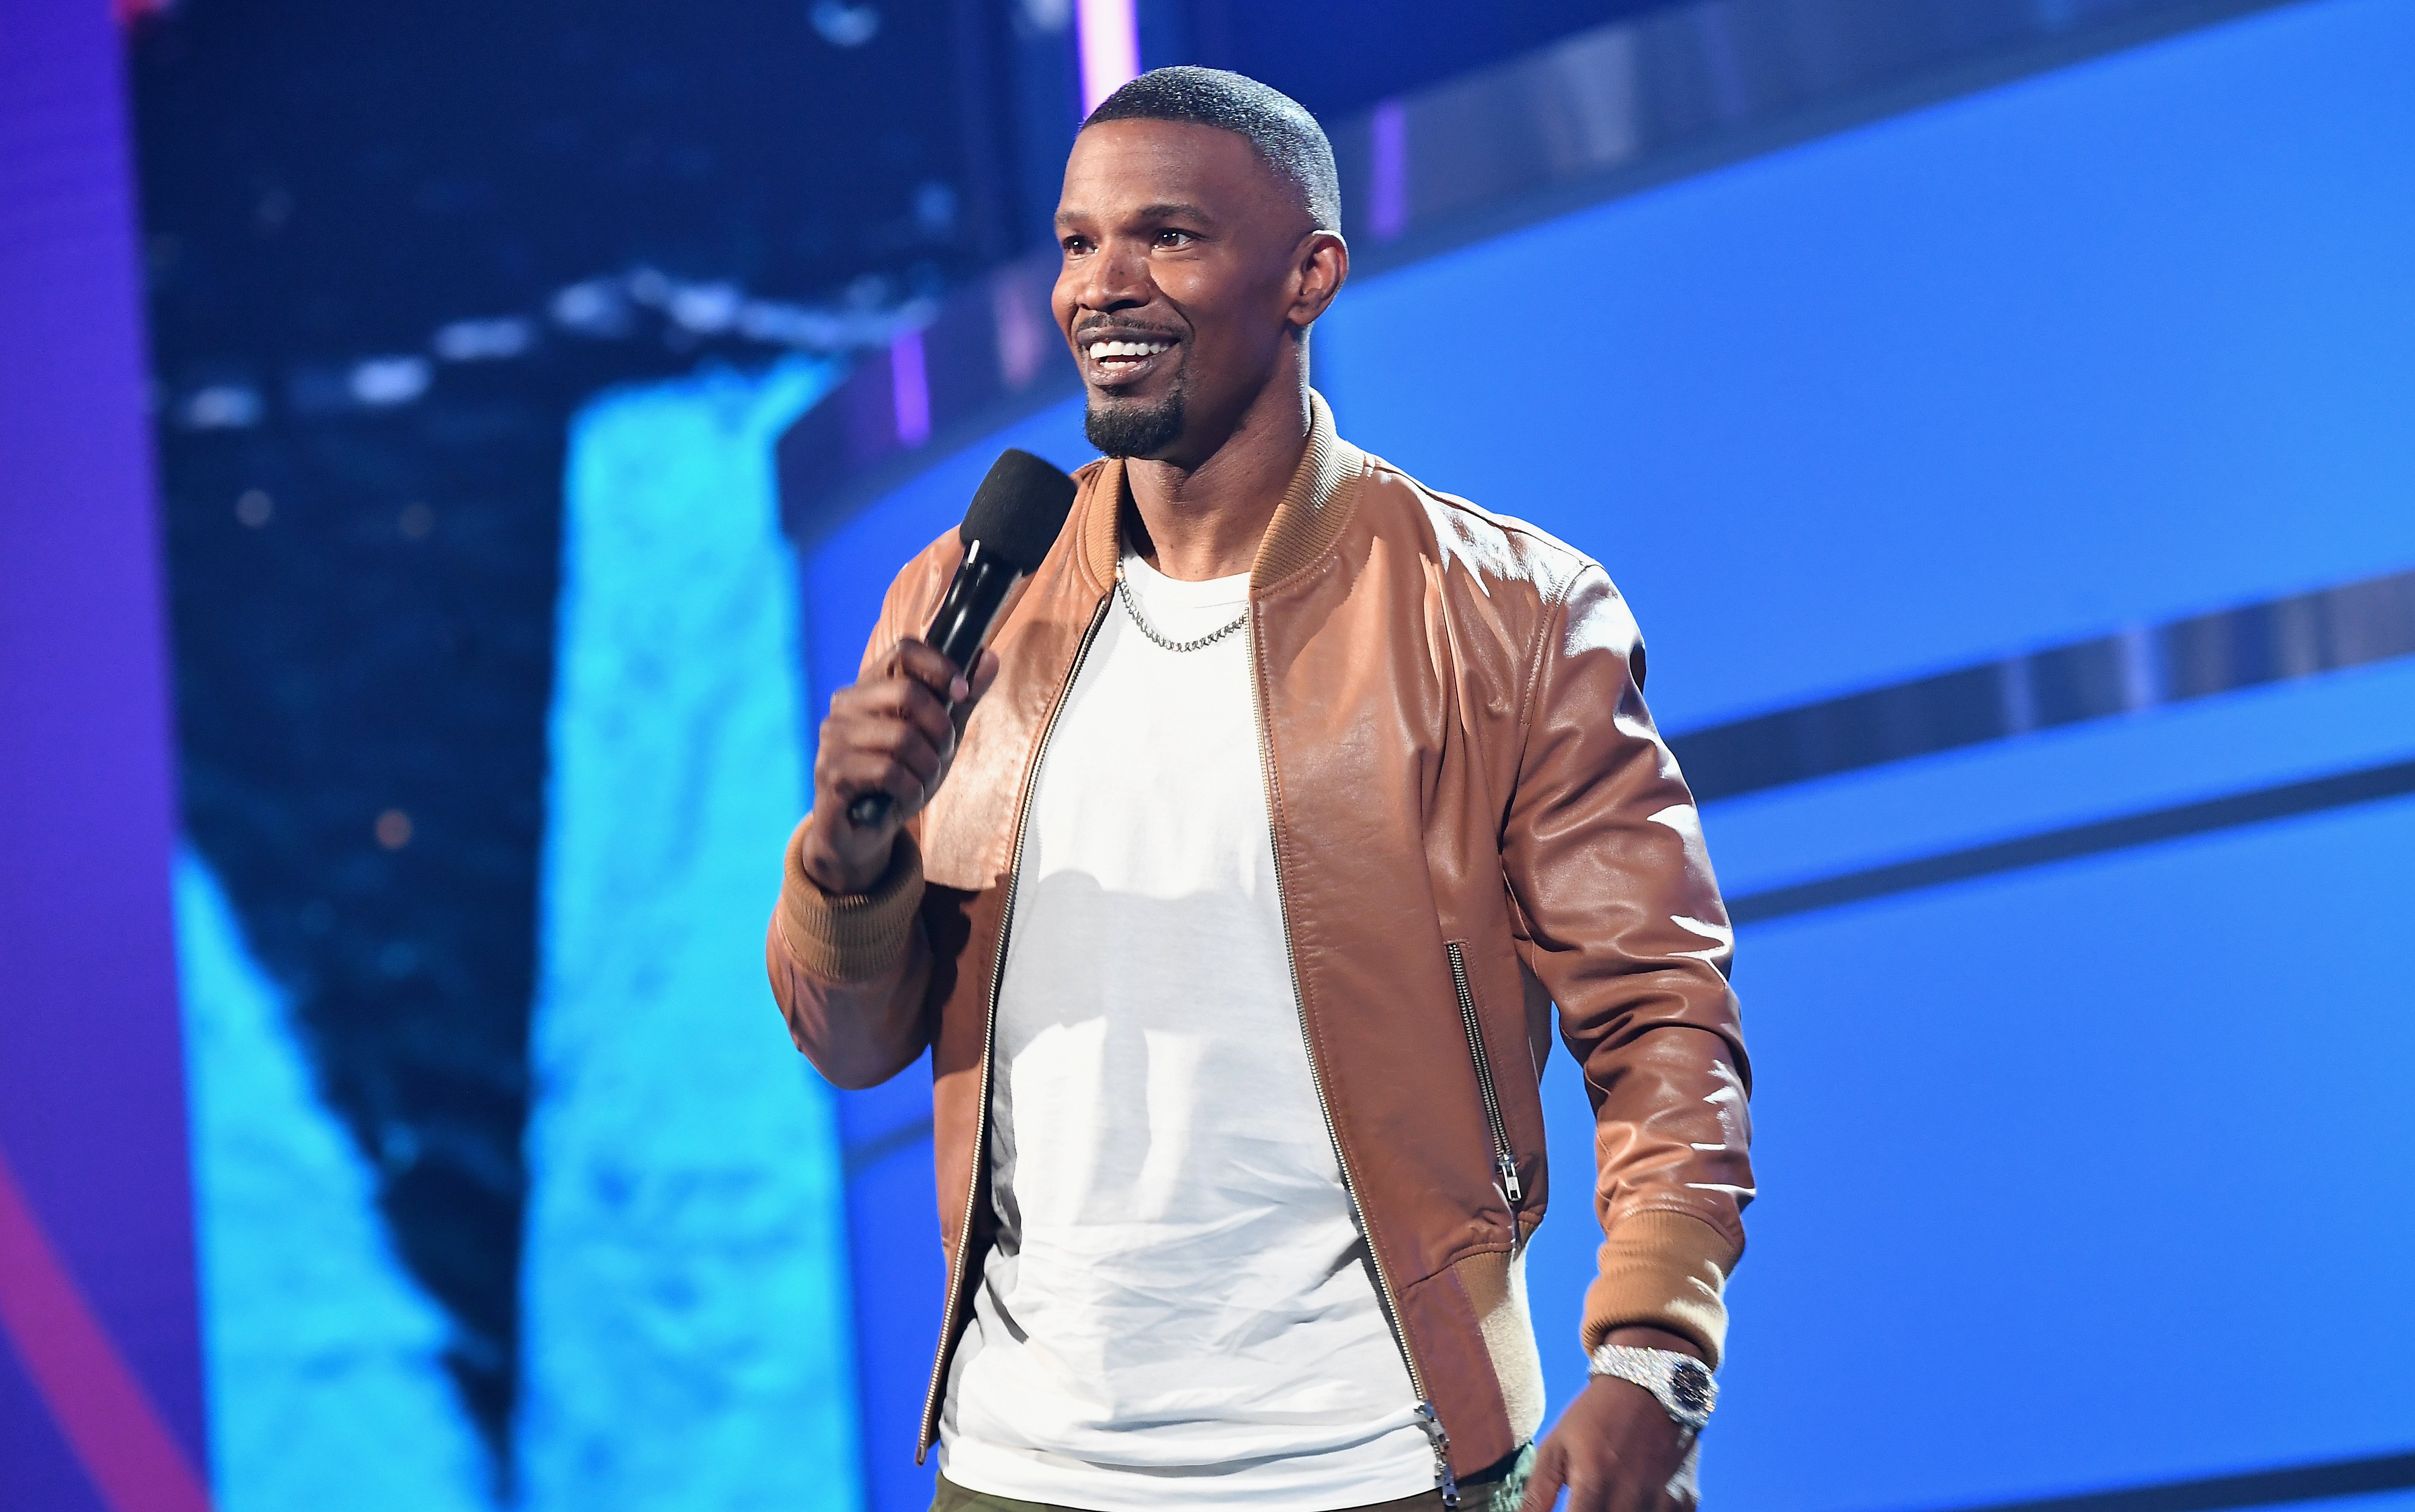  Jamie Foxx speaks onstage during the 2018 BET Awards at Microsoft Theater on June 24, 2018 in Los Angeles, California. | Photo: Getty Images